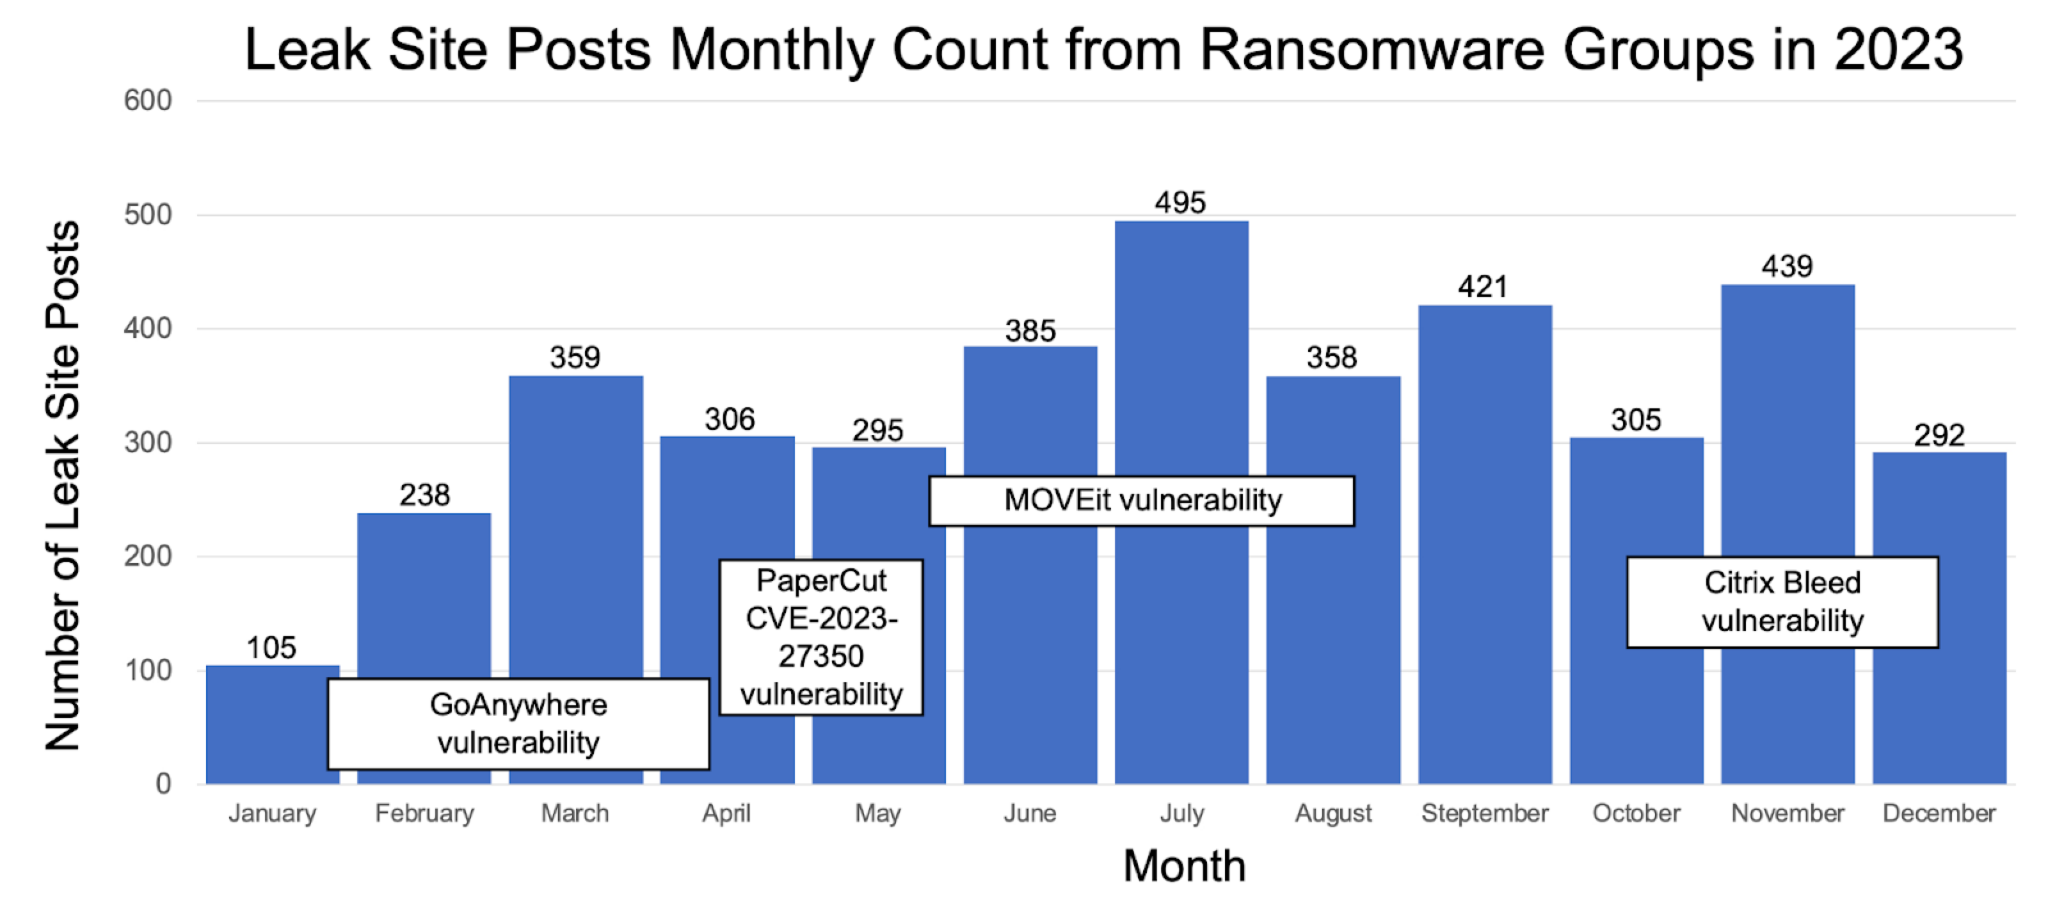 Image 2 is a bar graph comparing monthly counts of leak site posts by ransomware groups in 2023. Included are specific vulnerabilities. These include GoAnywhere, PaperCut CVE-2023-27350, MOVEit and Citrix Bleed. 